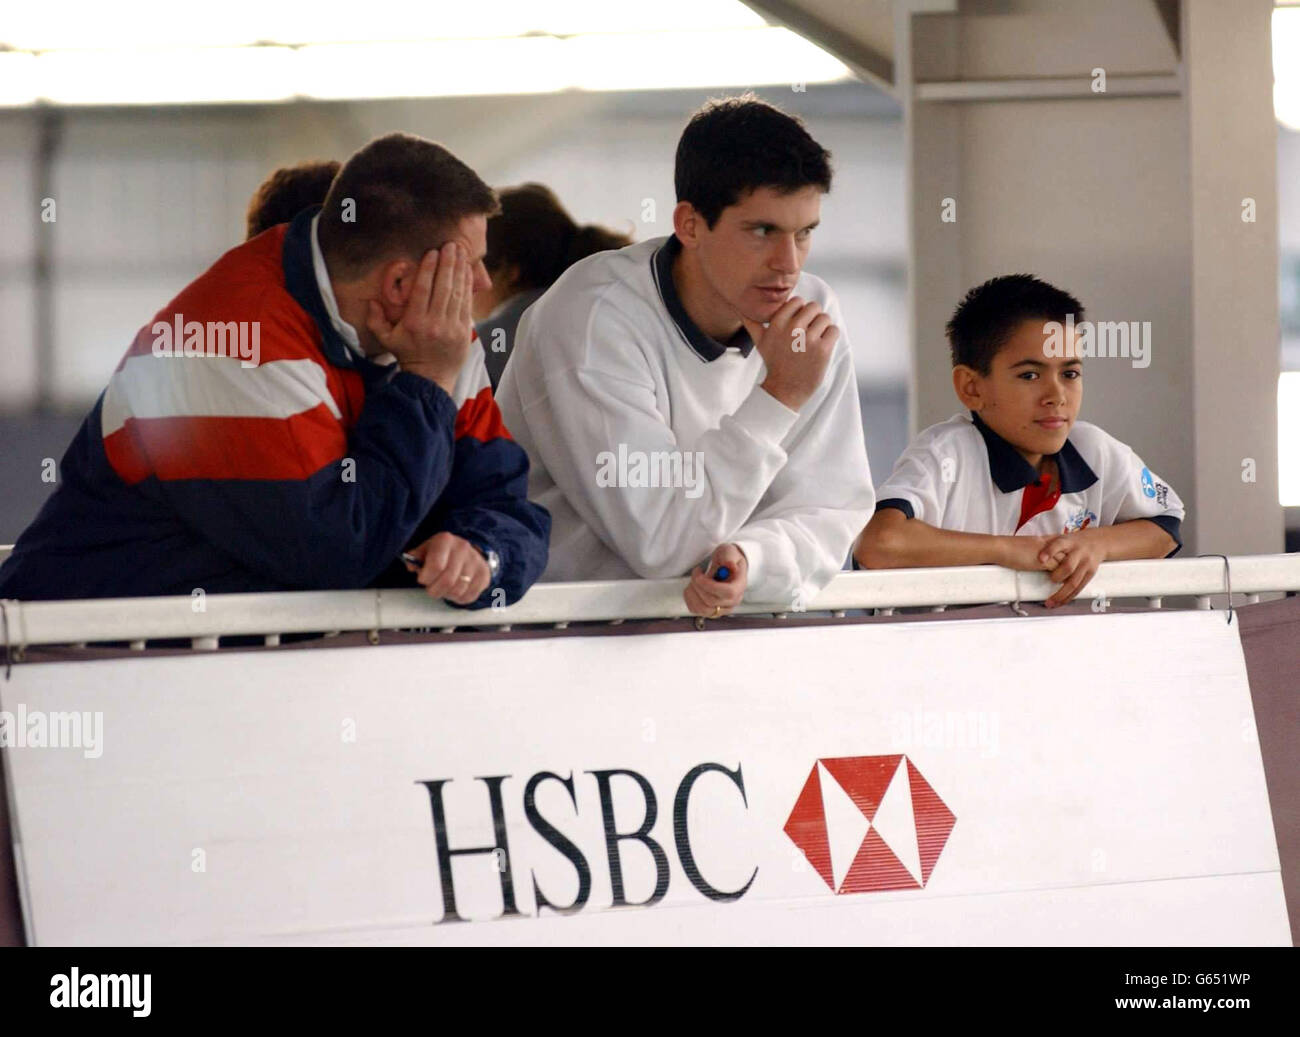 British tennis star Tim Henman watches the play during the National Finals of the HSBC/British Schools Tennis Team Competitions 2002 at the Redbridge Sports Centre in Barkingside, Essex. Stock Photo